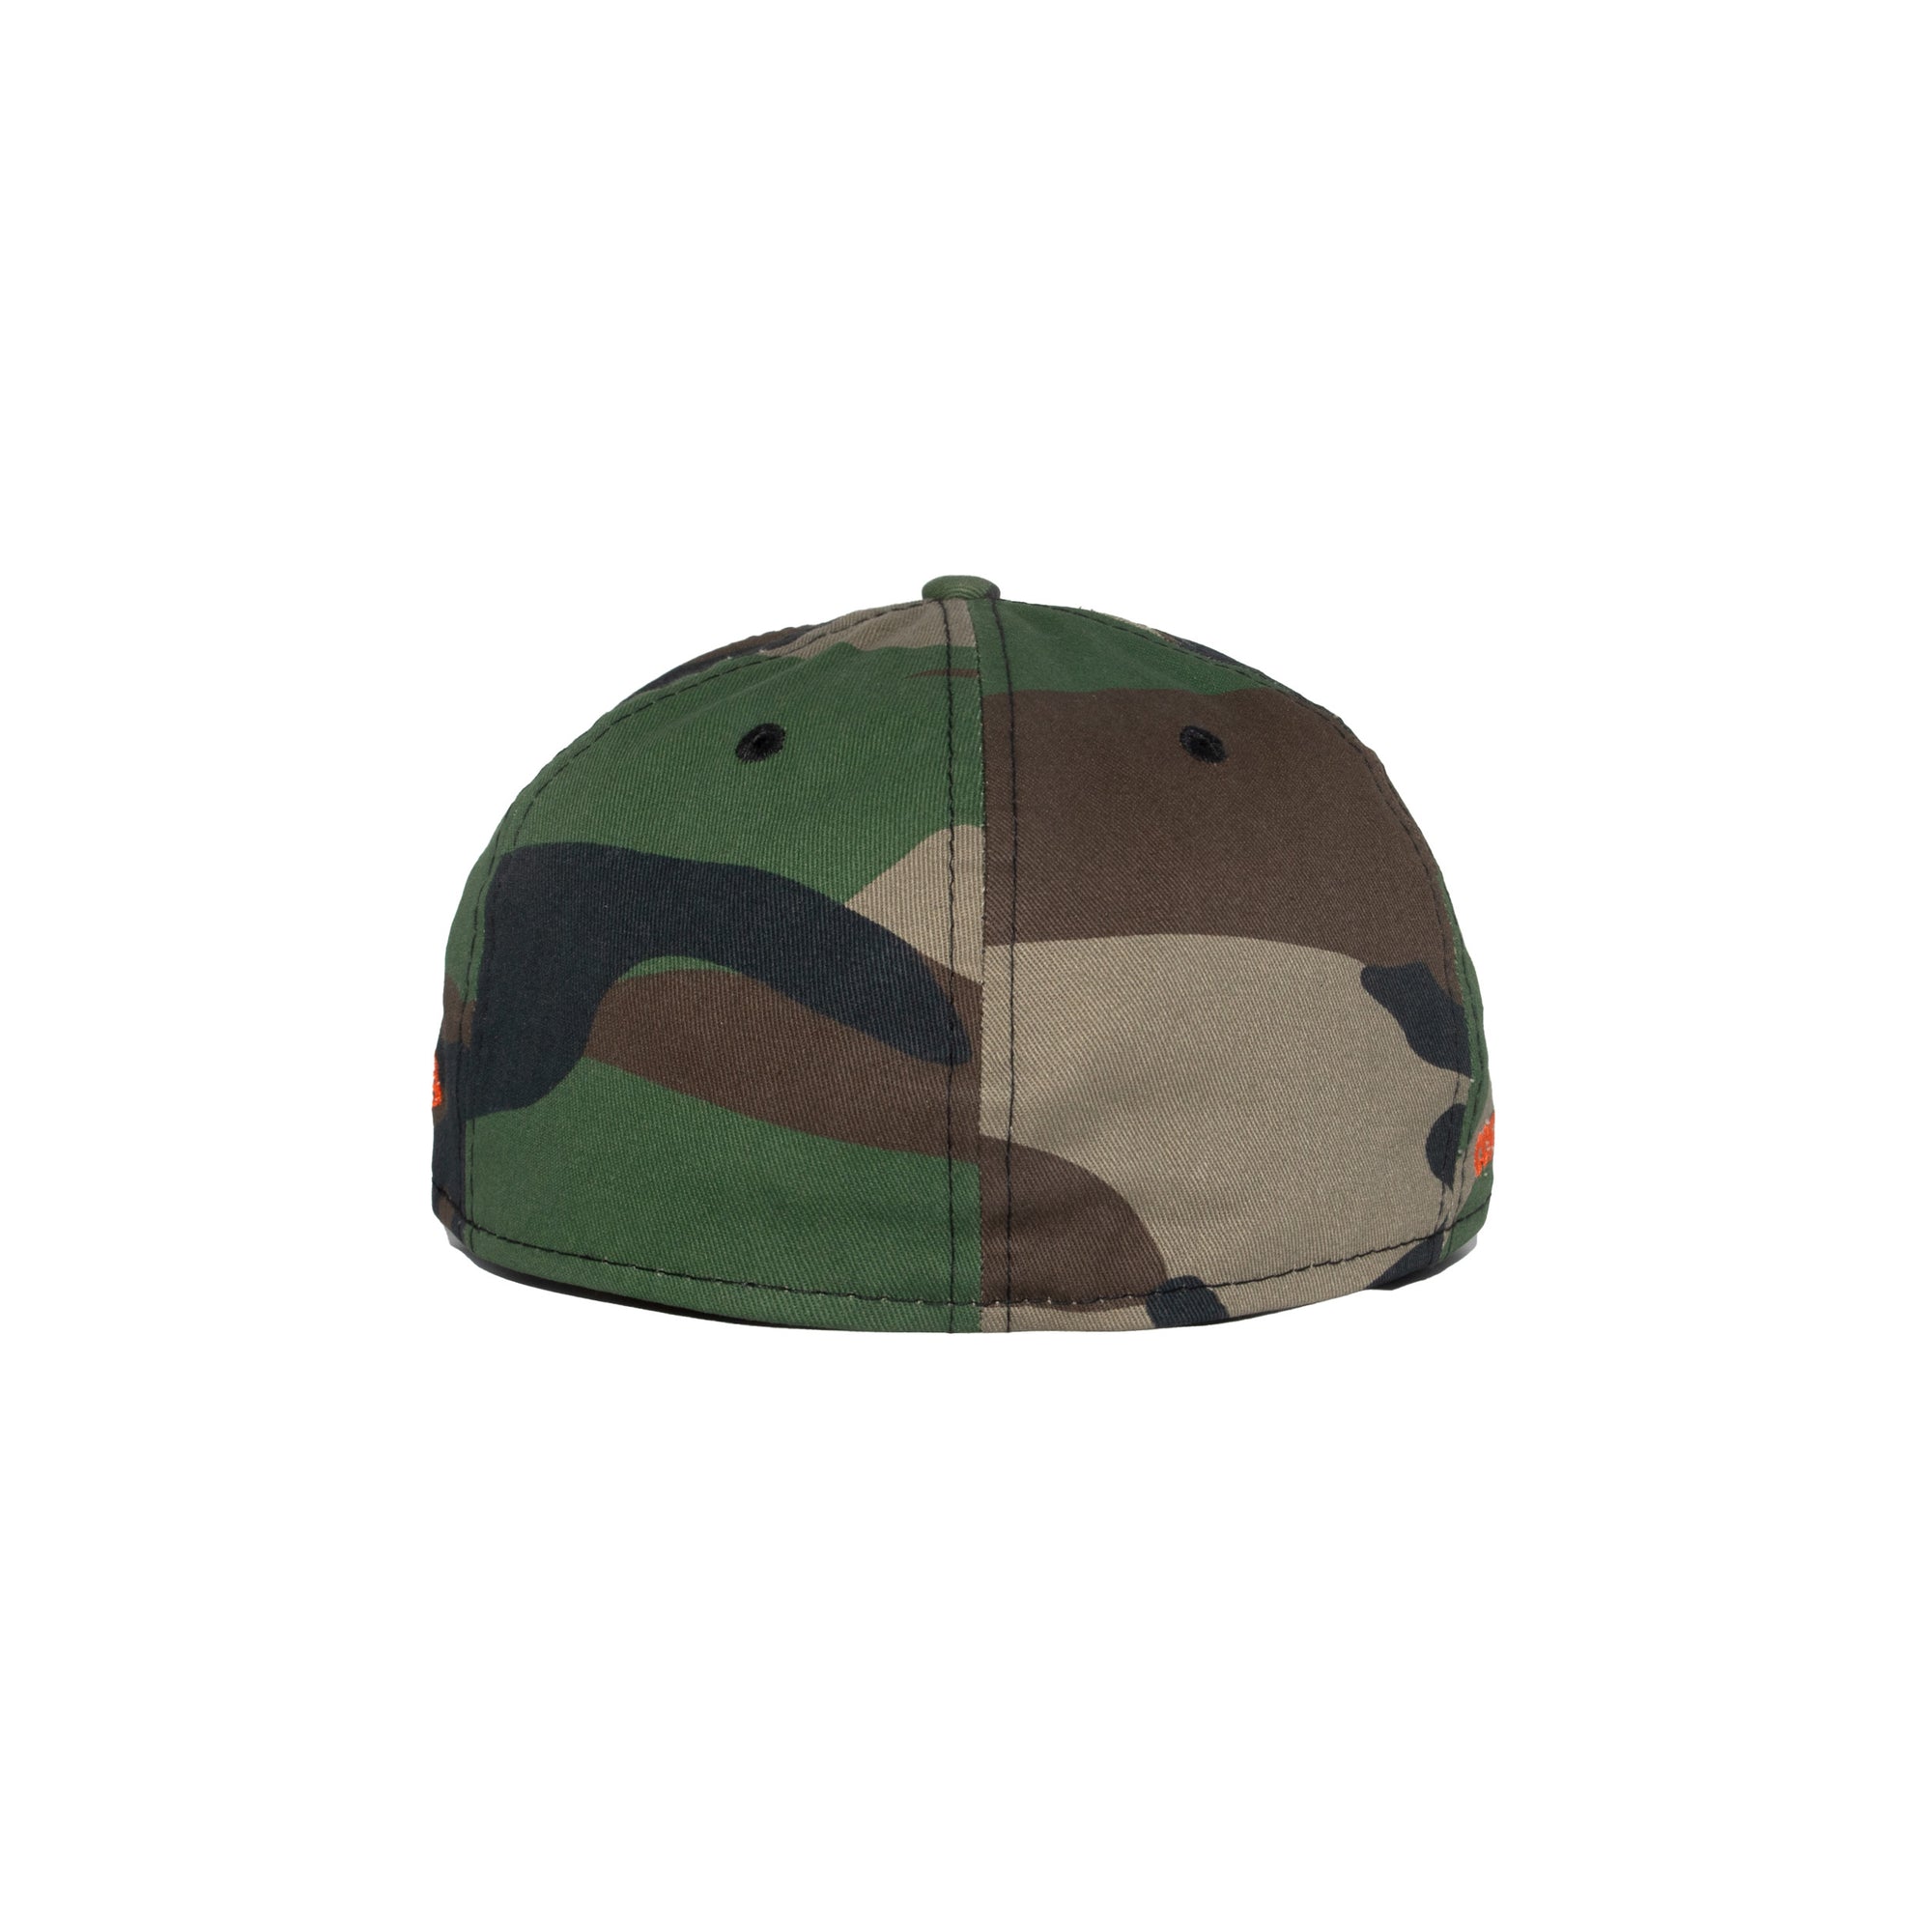 CAMO '7' FITTED